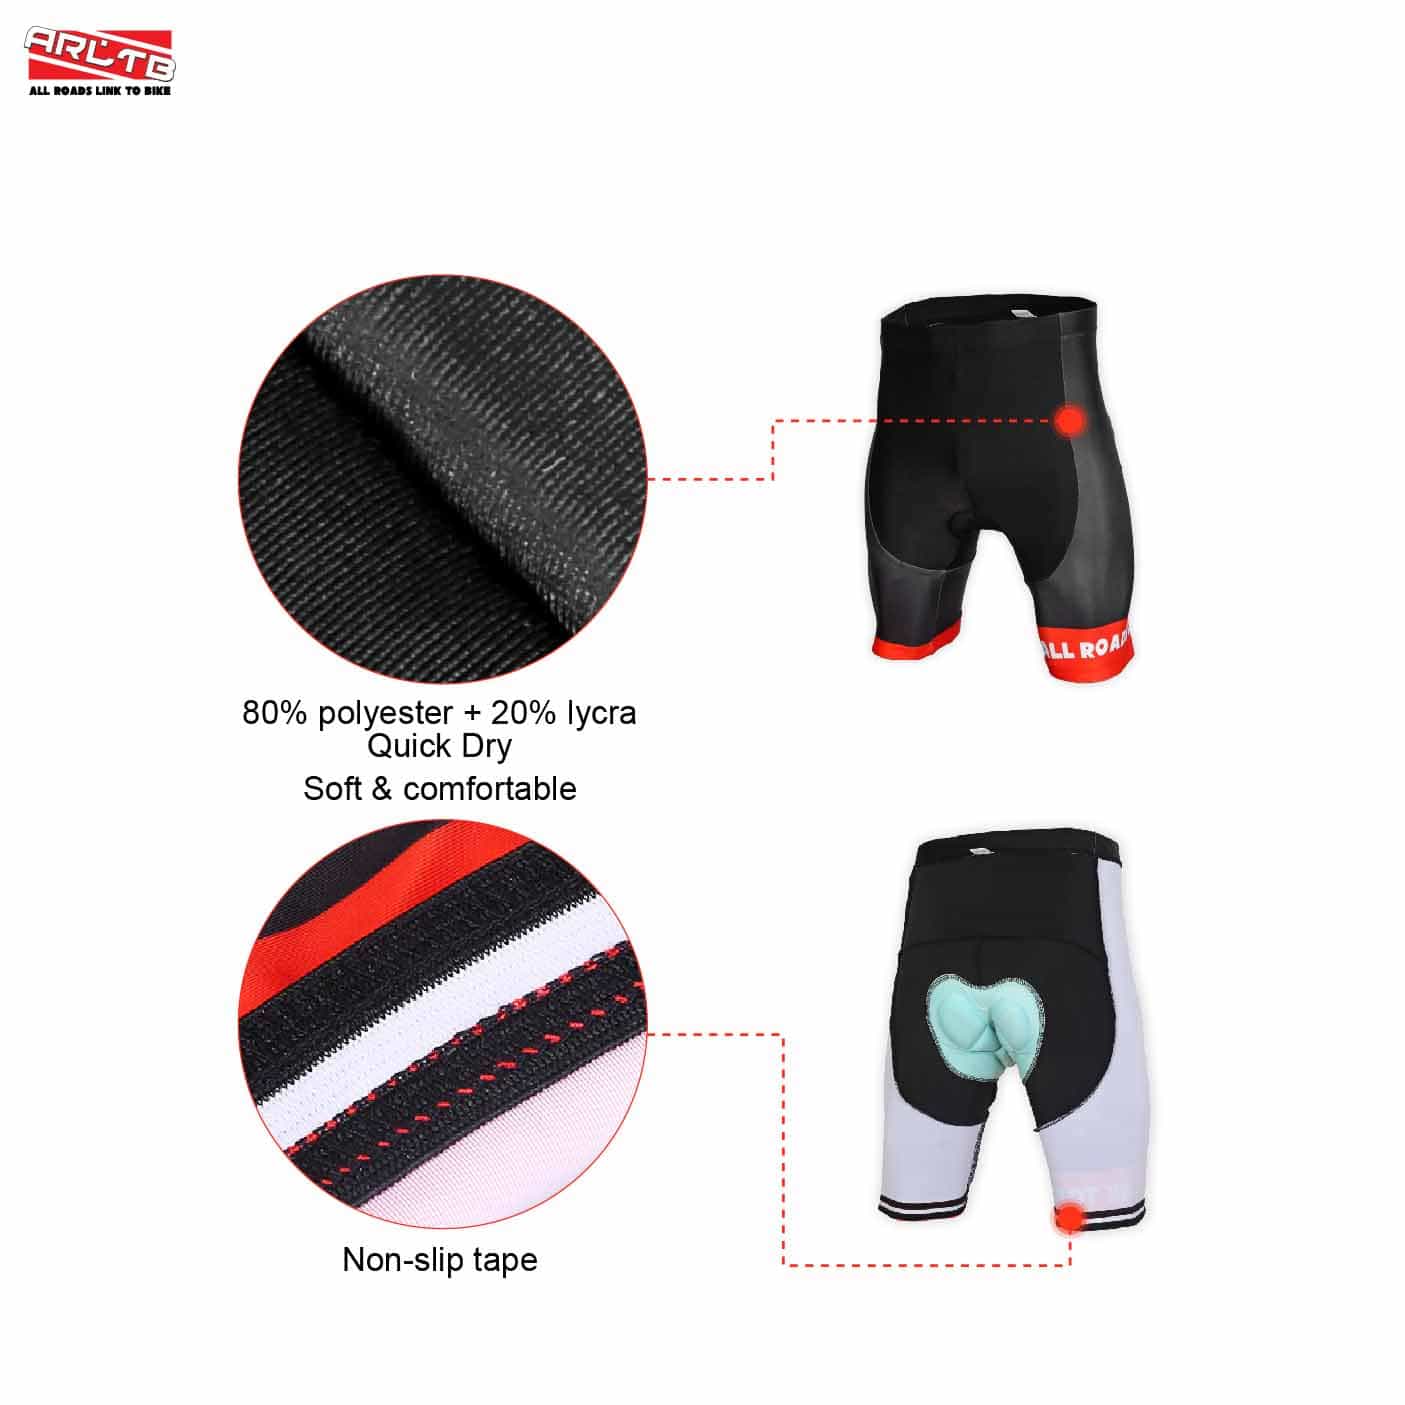 Arltb Bike Shorts 5 Sizes Men Women Gel Padded Cycling Bicycle Compression Cycle Touring Shorts Tights Underwear Pants Elastic Breathable for Mountain Bike MTB Cycle Road Bike BMX Motorcycle 03 1